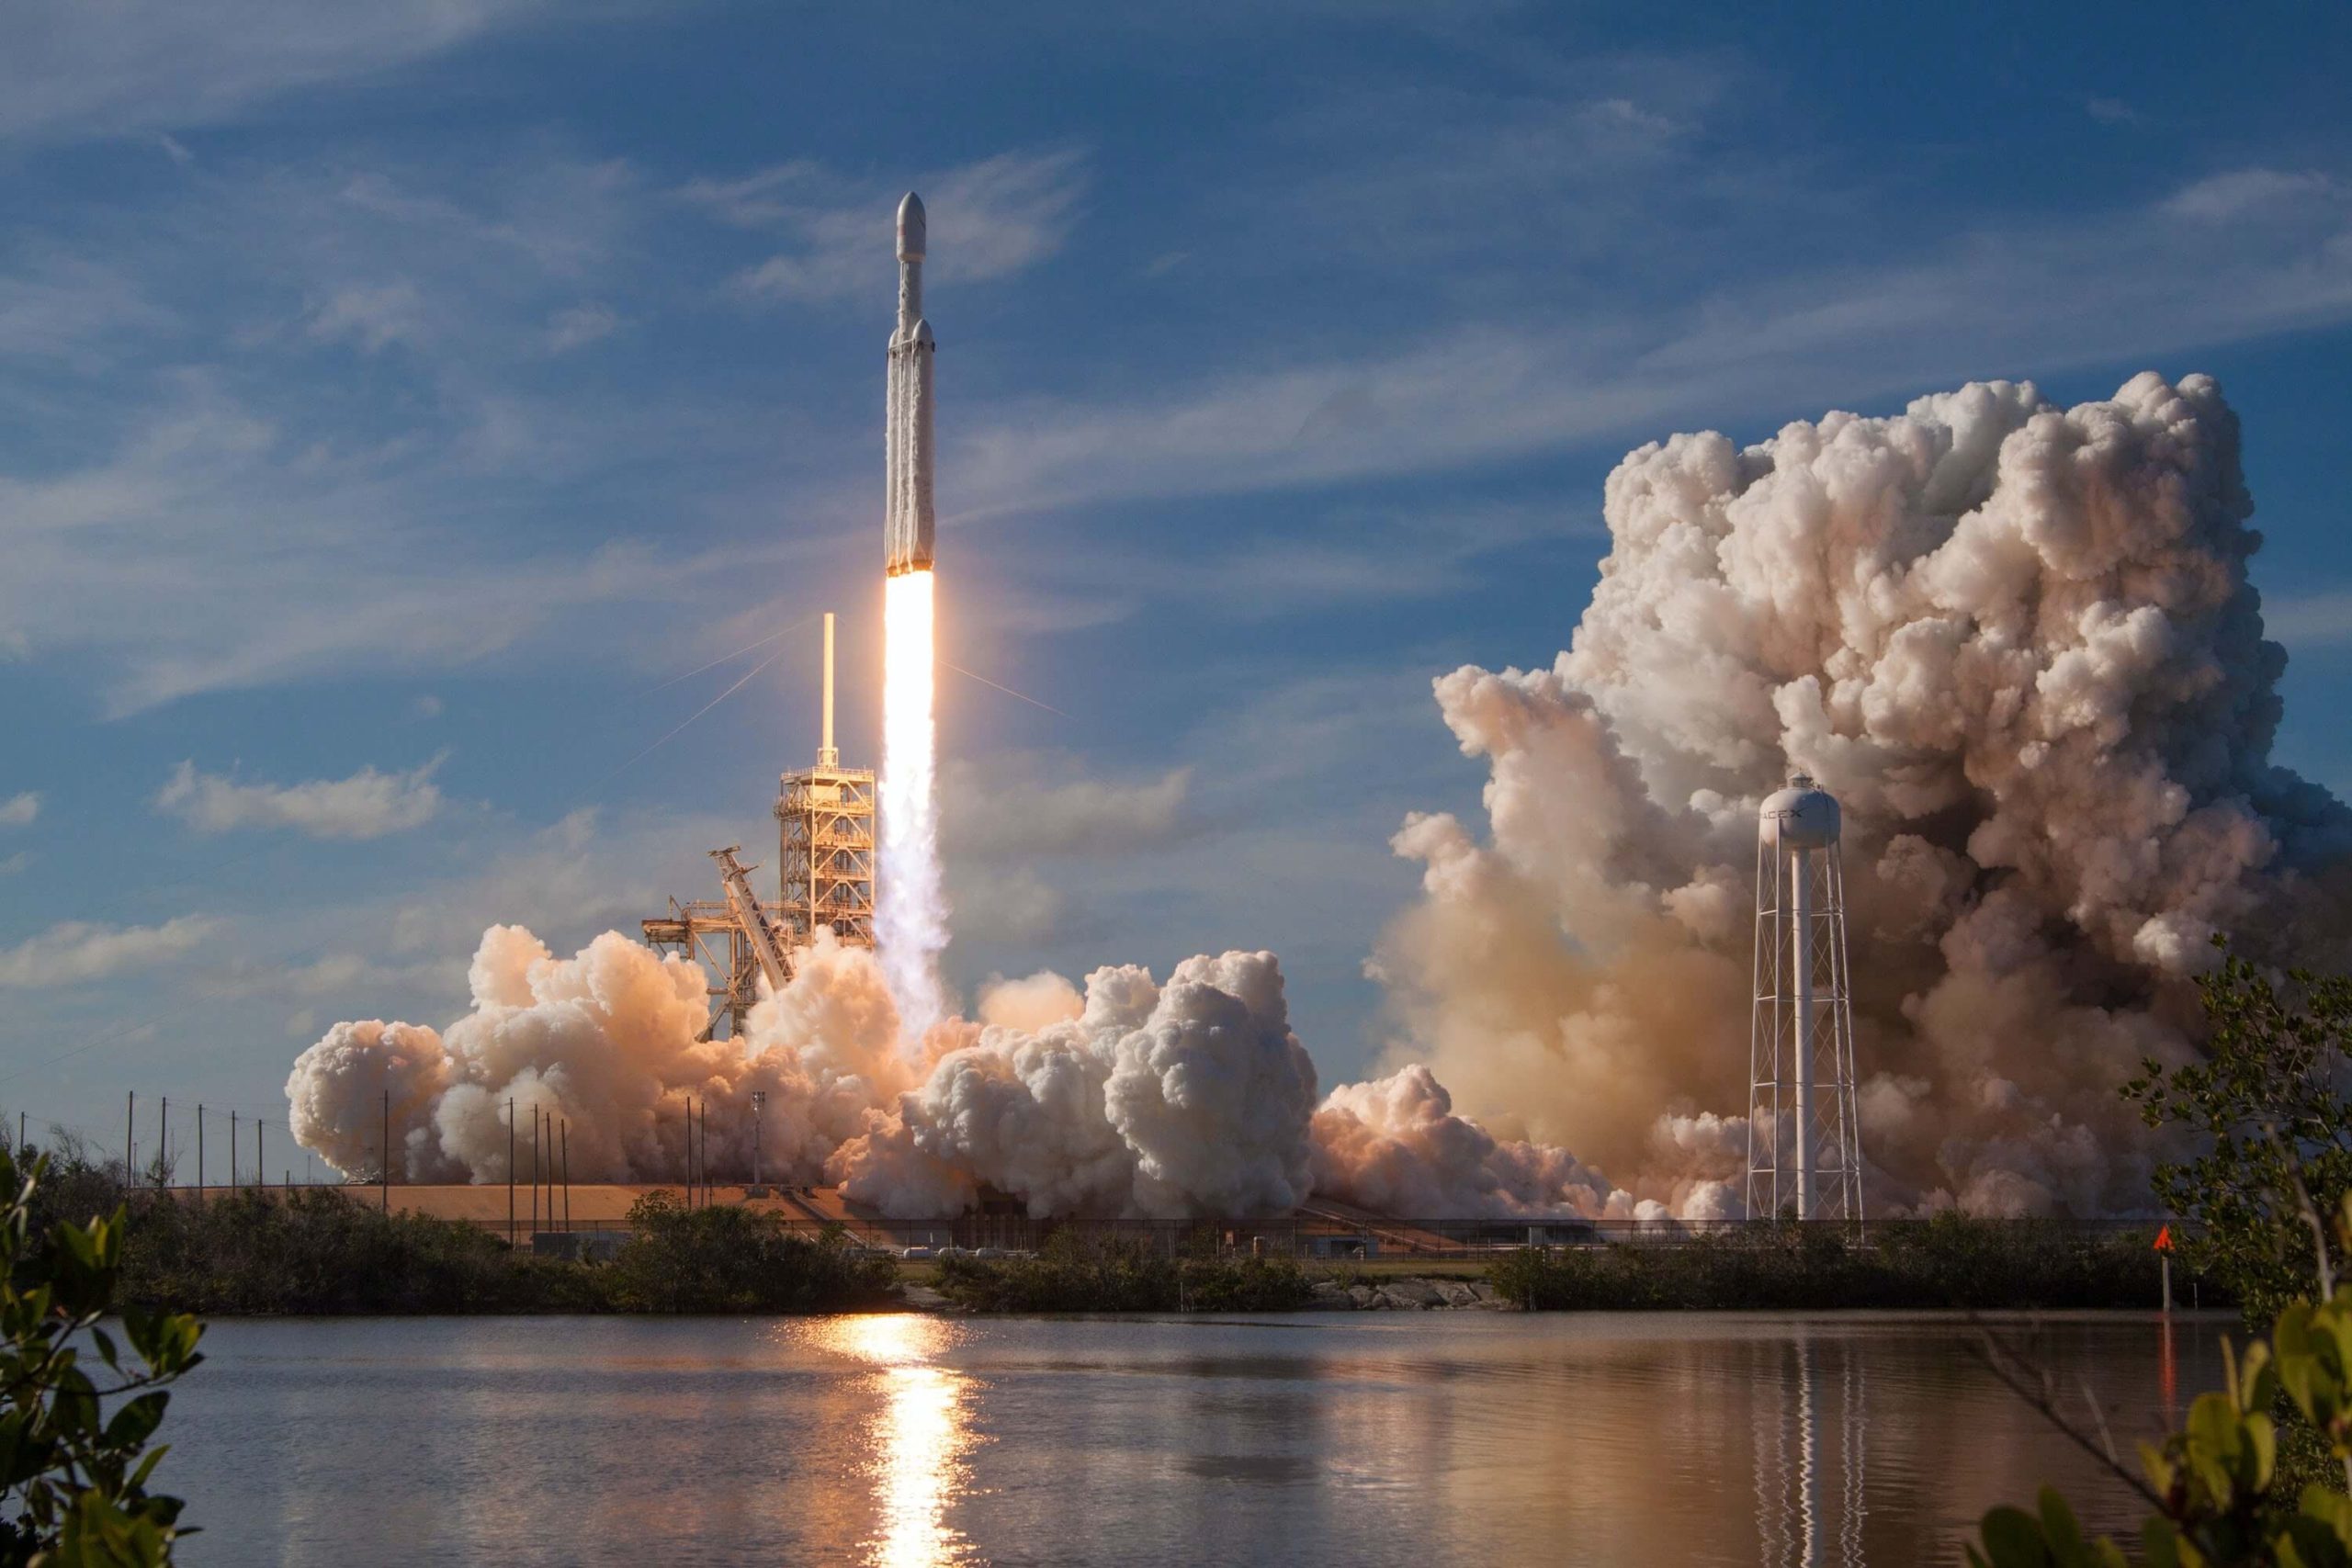 Space X Falcon Heavy Rocket launching into space with purpose and determination.